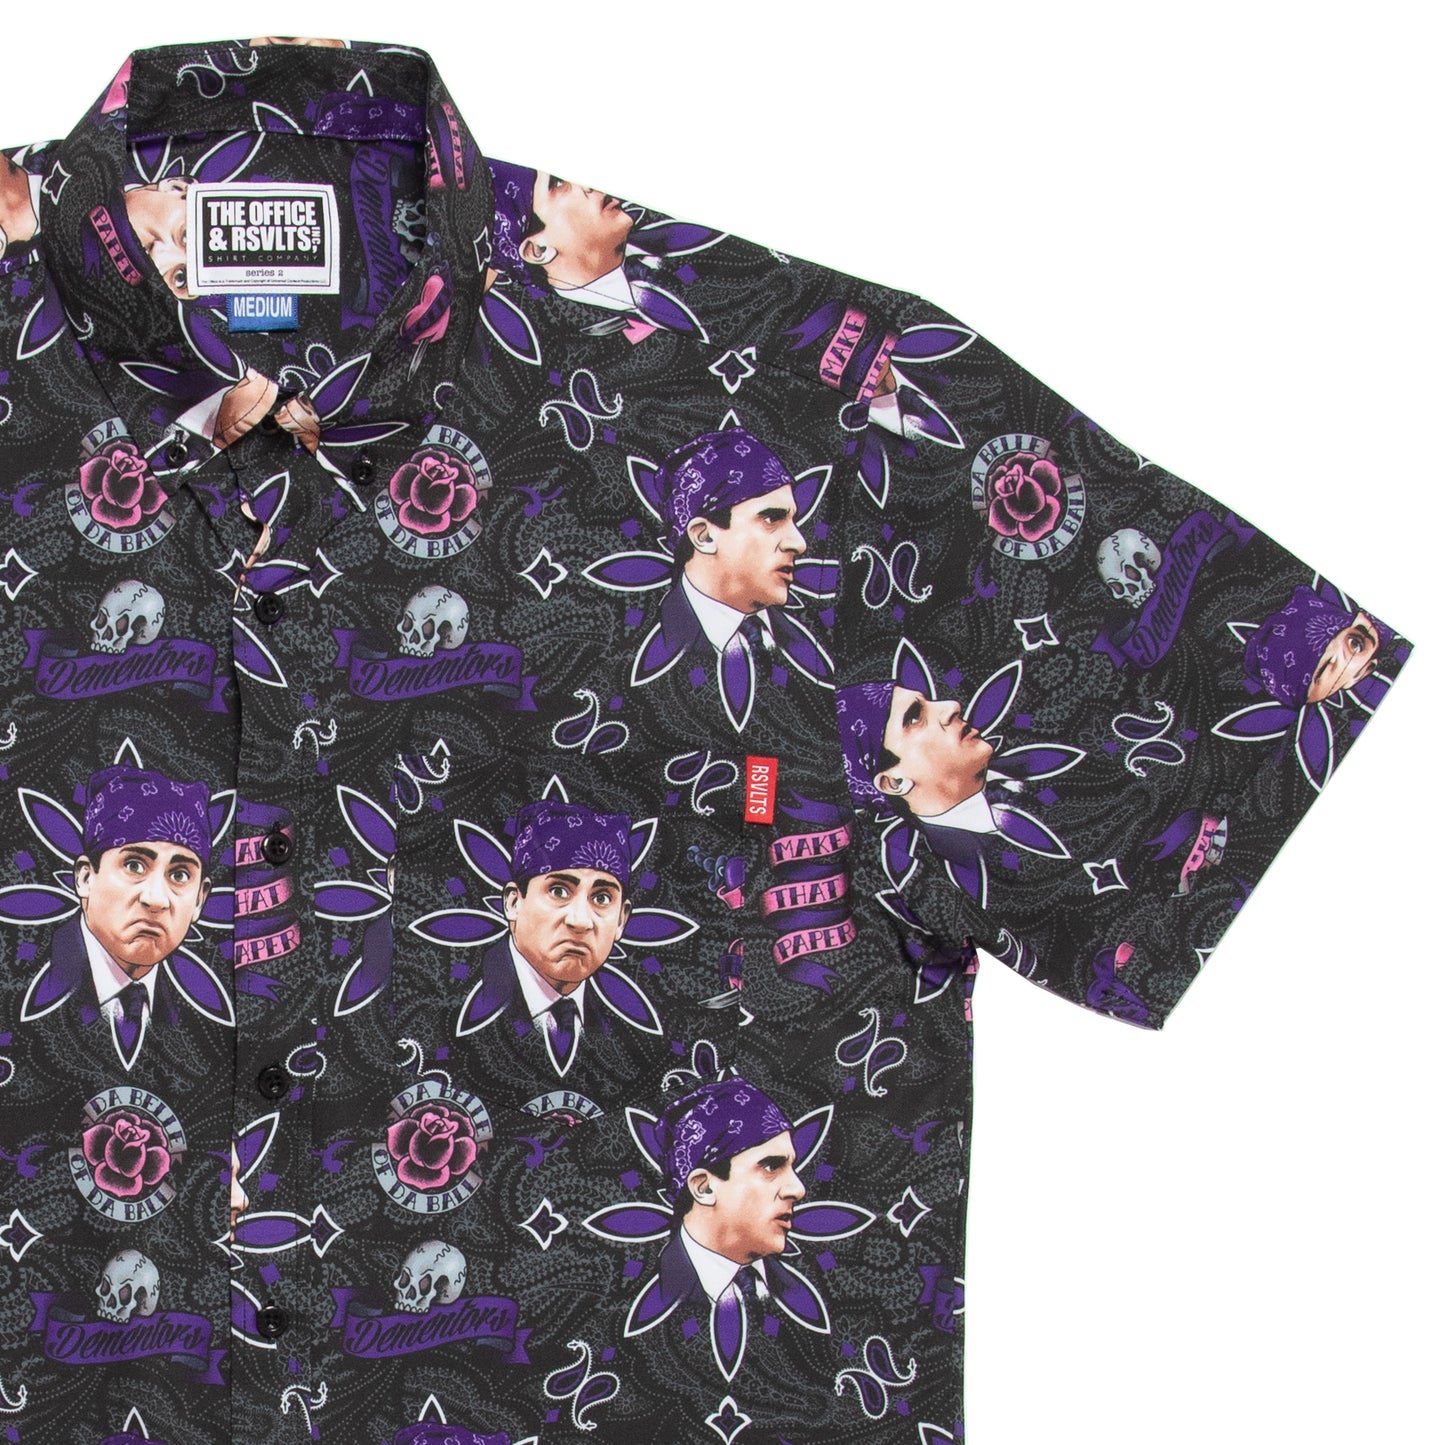 The Office "Prison Mike" Shirt